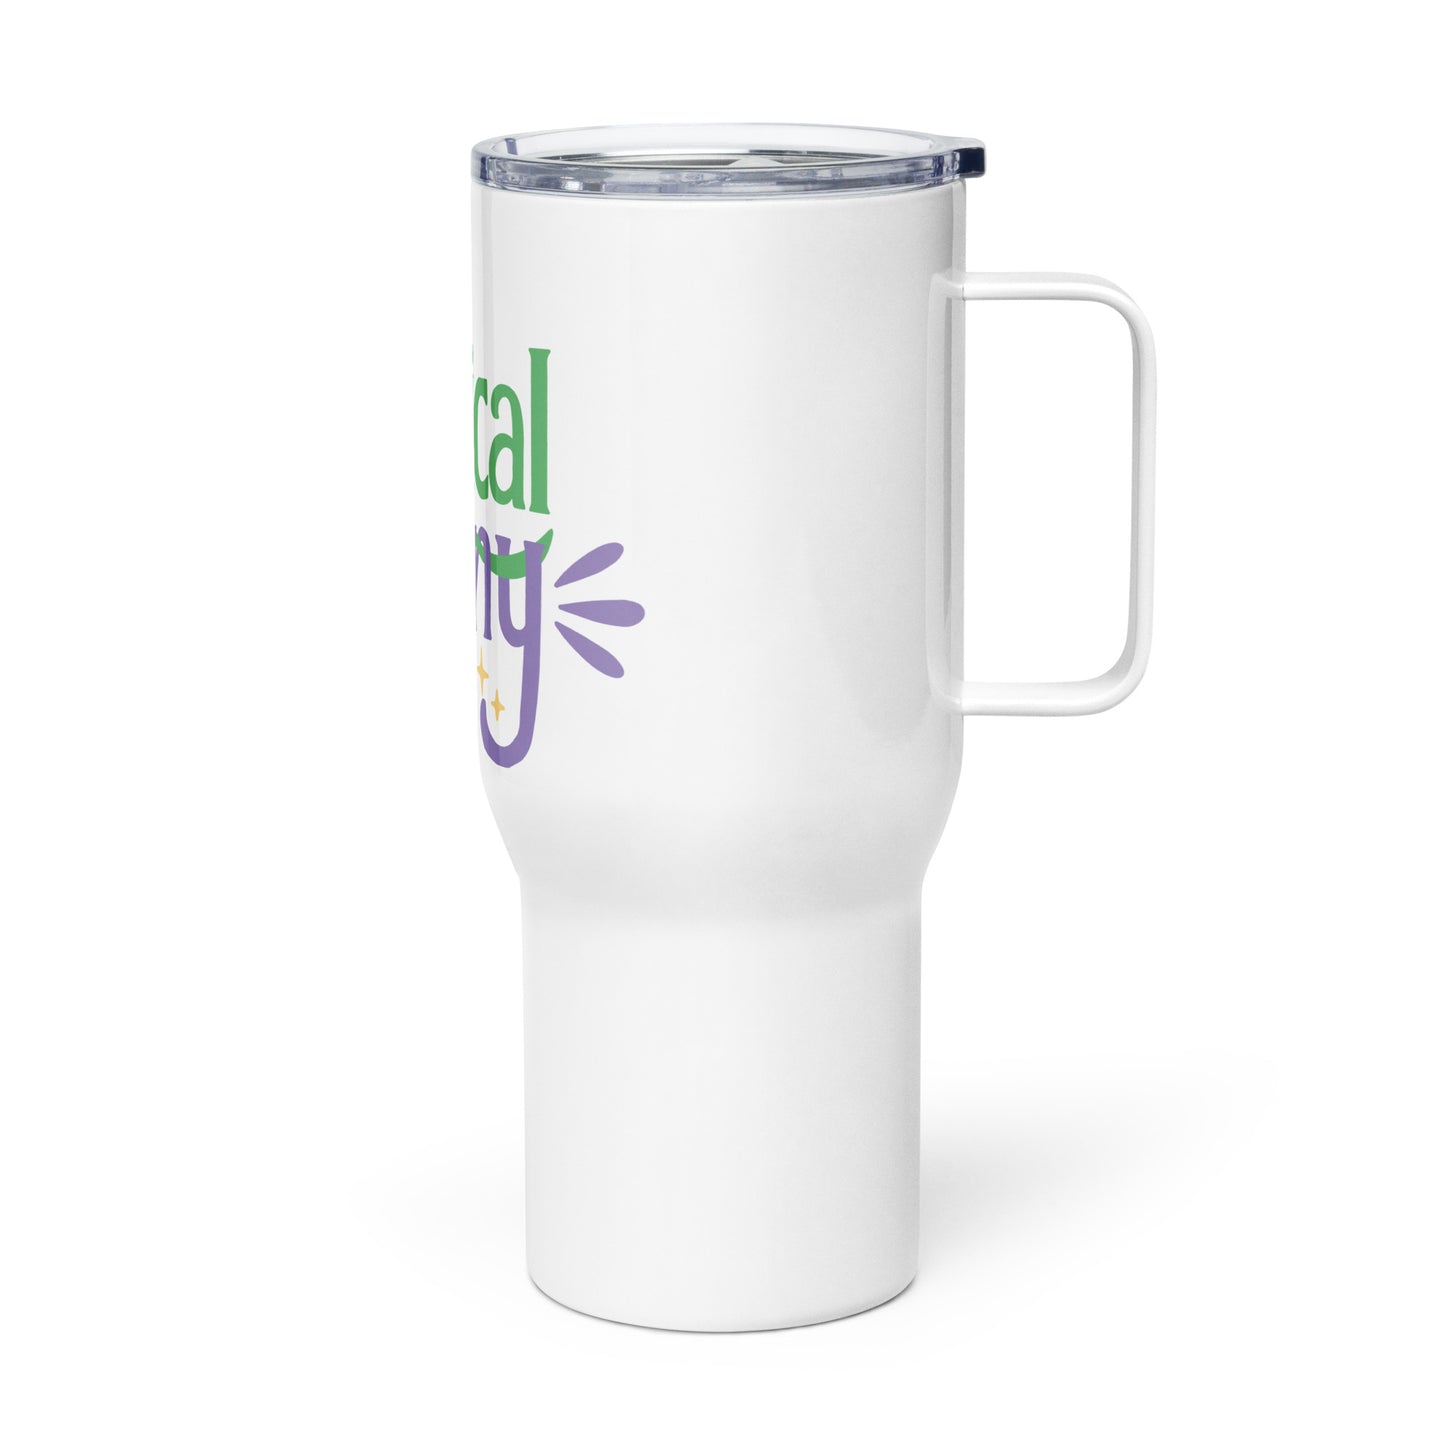 Magical Nanny travel mug with a handle by The Nanny Store